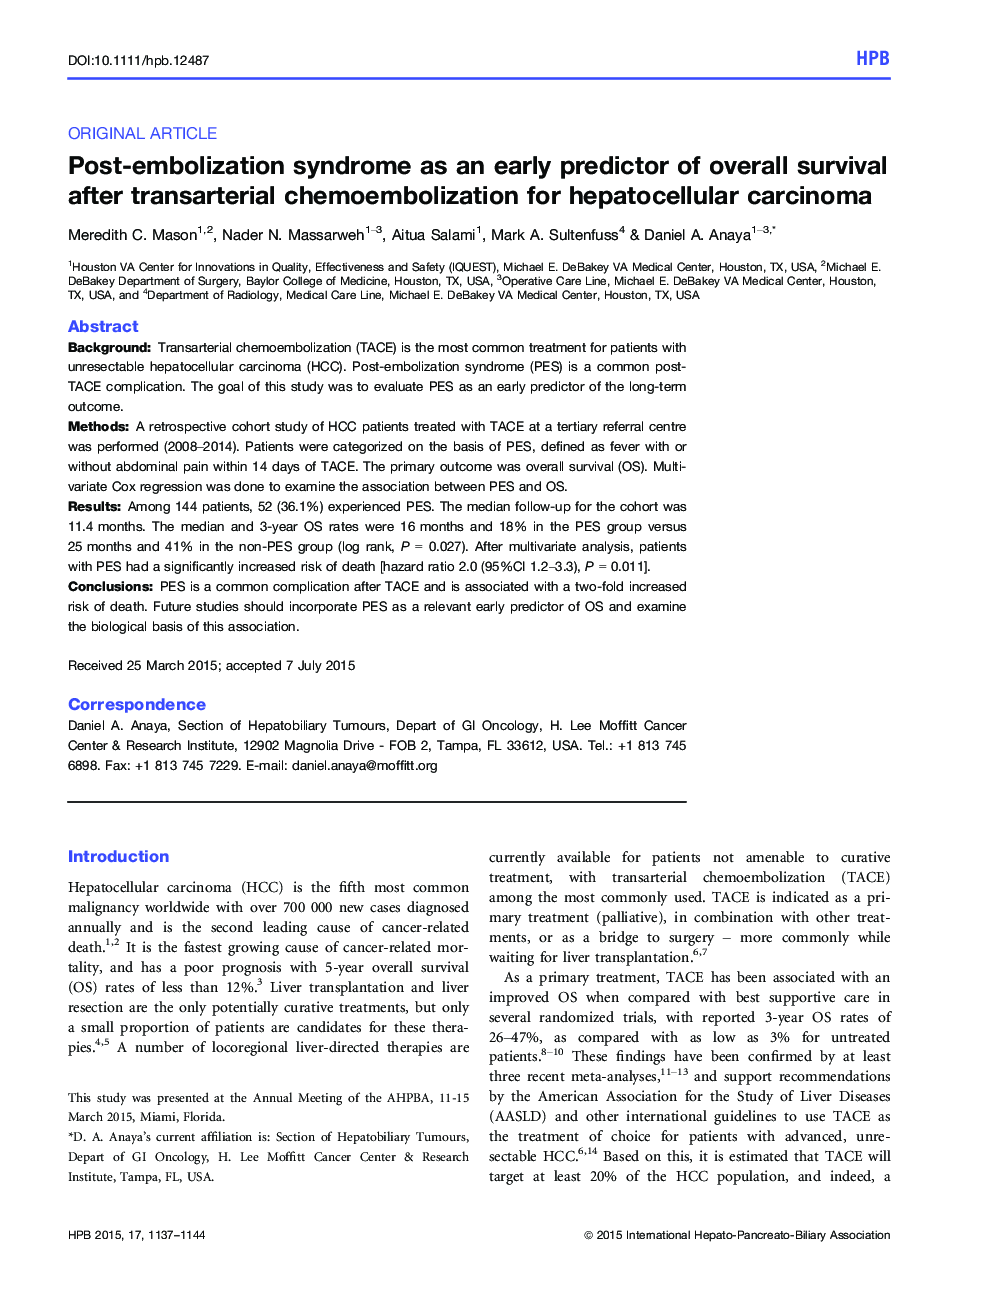 Post‐embolization syndrome as an early predictor of overall survival after transarterial chemoembolization for hepatocellular carcinoma